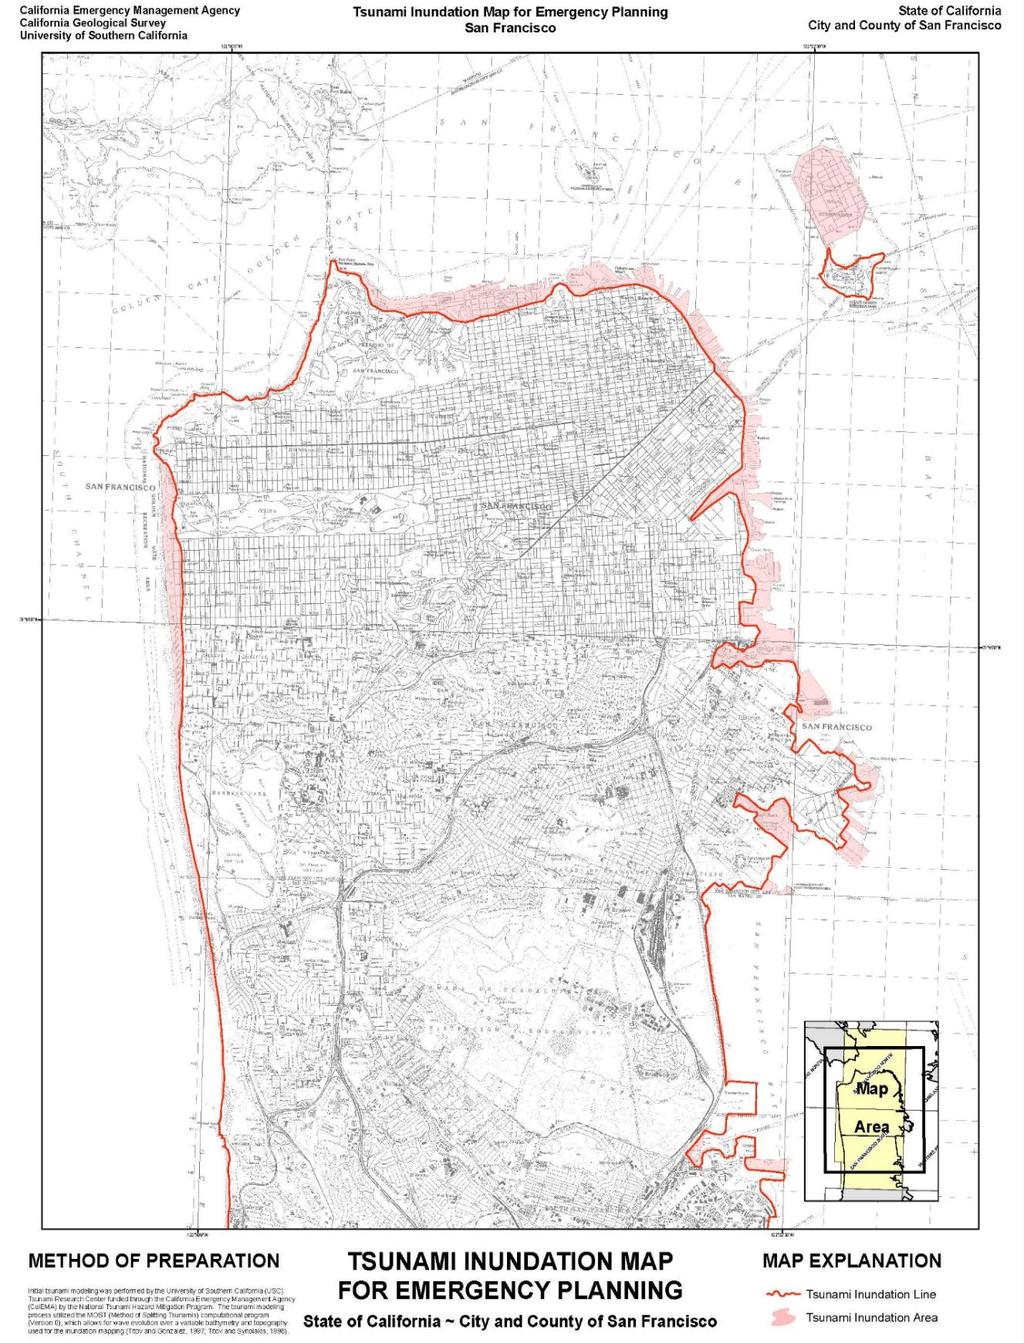 B-1 State Tsunami Inundation Map San Francisco Overview Source: Cal OES, CGS, USC. Retrieved from http://www.conservation.ca.